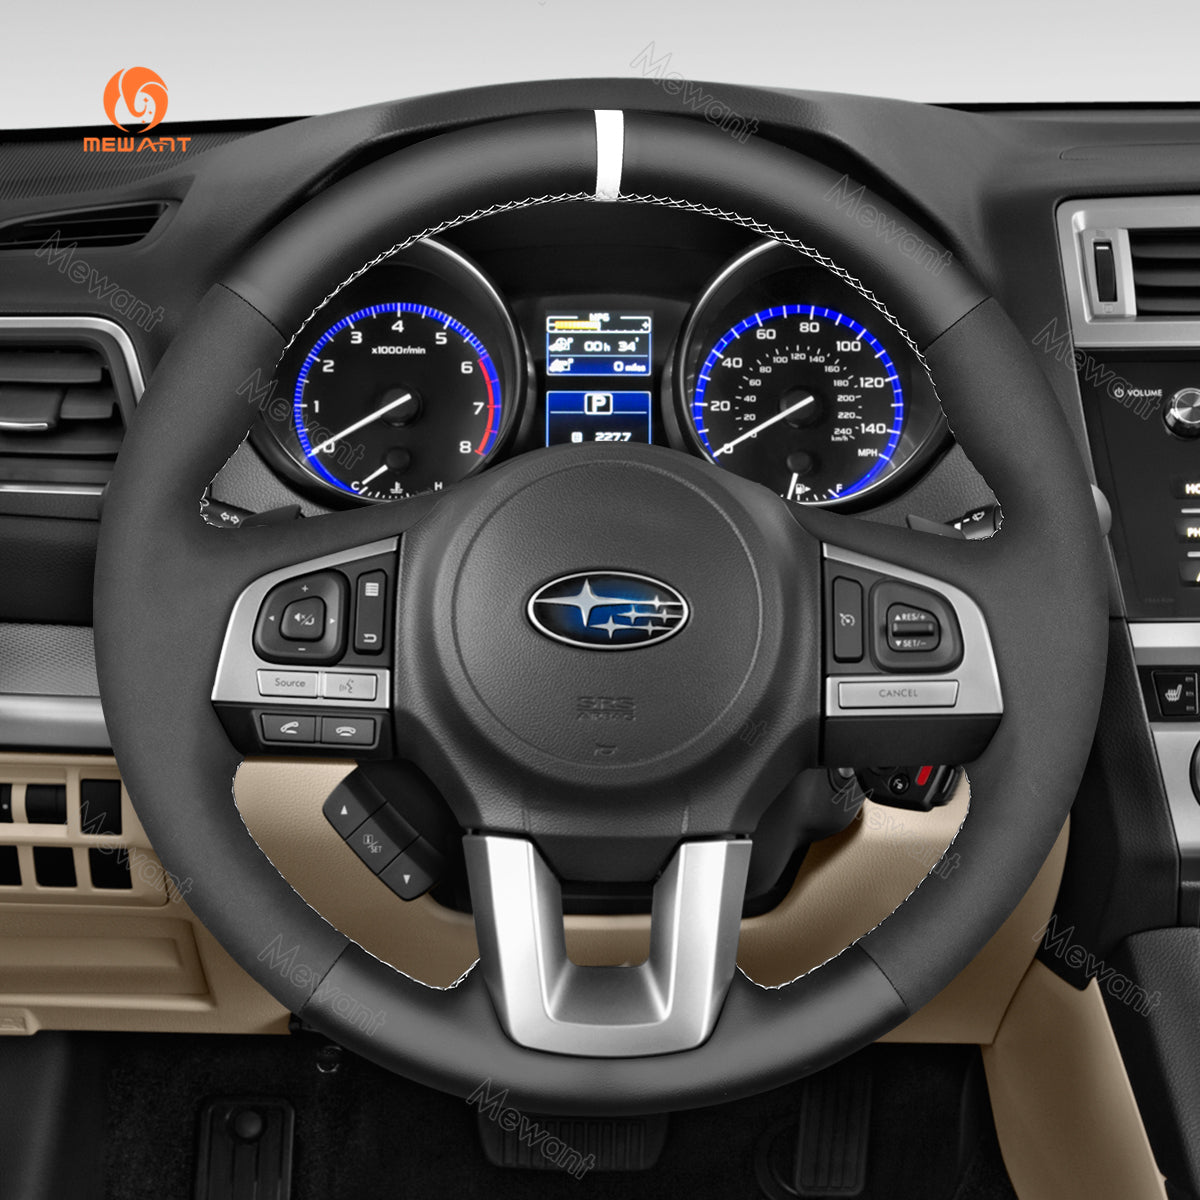 MEWANT Hand Stitch Car Steering Wheel Cover for Subaru Legacy Outback XV (Crosstrek) Forester